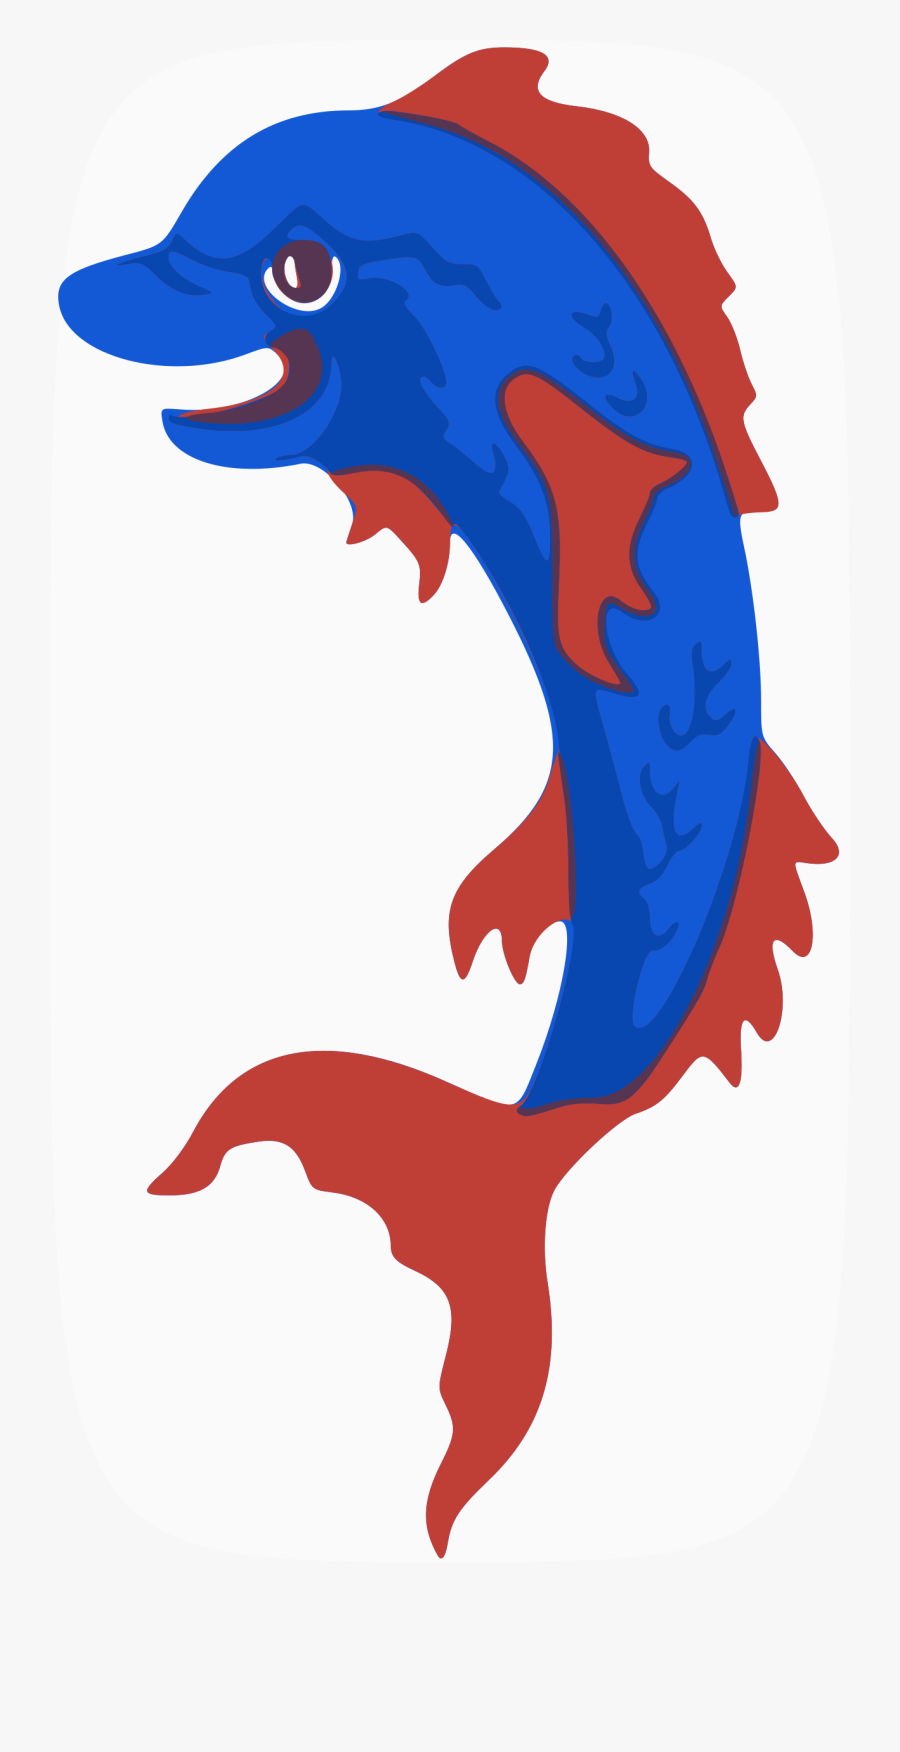 Miami Dolphins Drawing - Heraldic Fish Png, Transparent Clipart